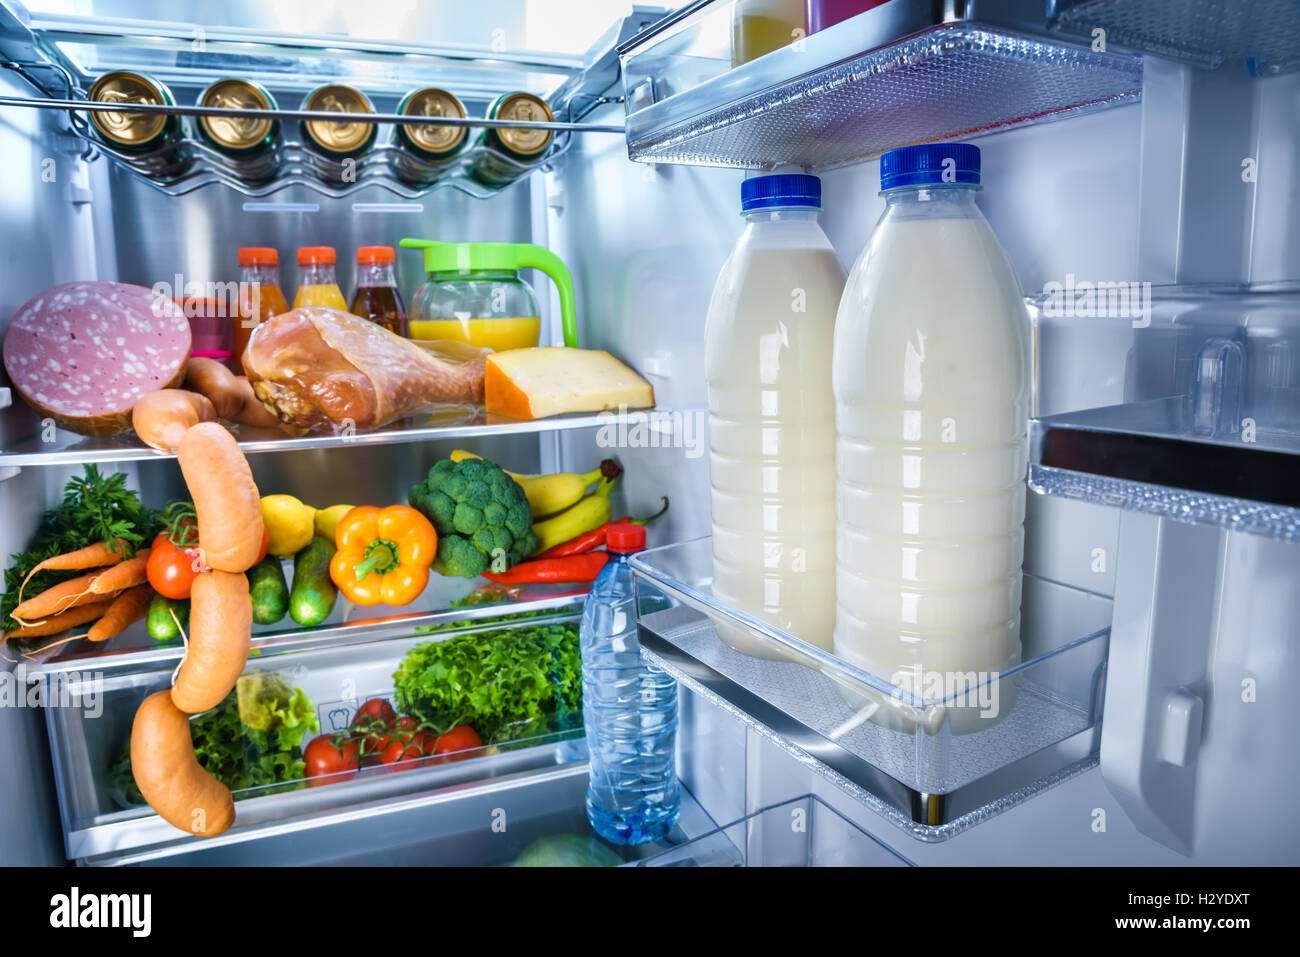 https://c8.alamy.com/comp/H2YDXT/open-refrigerator-filled-with-food-focus-on-bottles-of-milk-in-the-H2YDXT.jpg